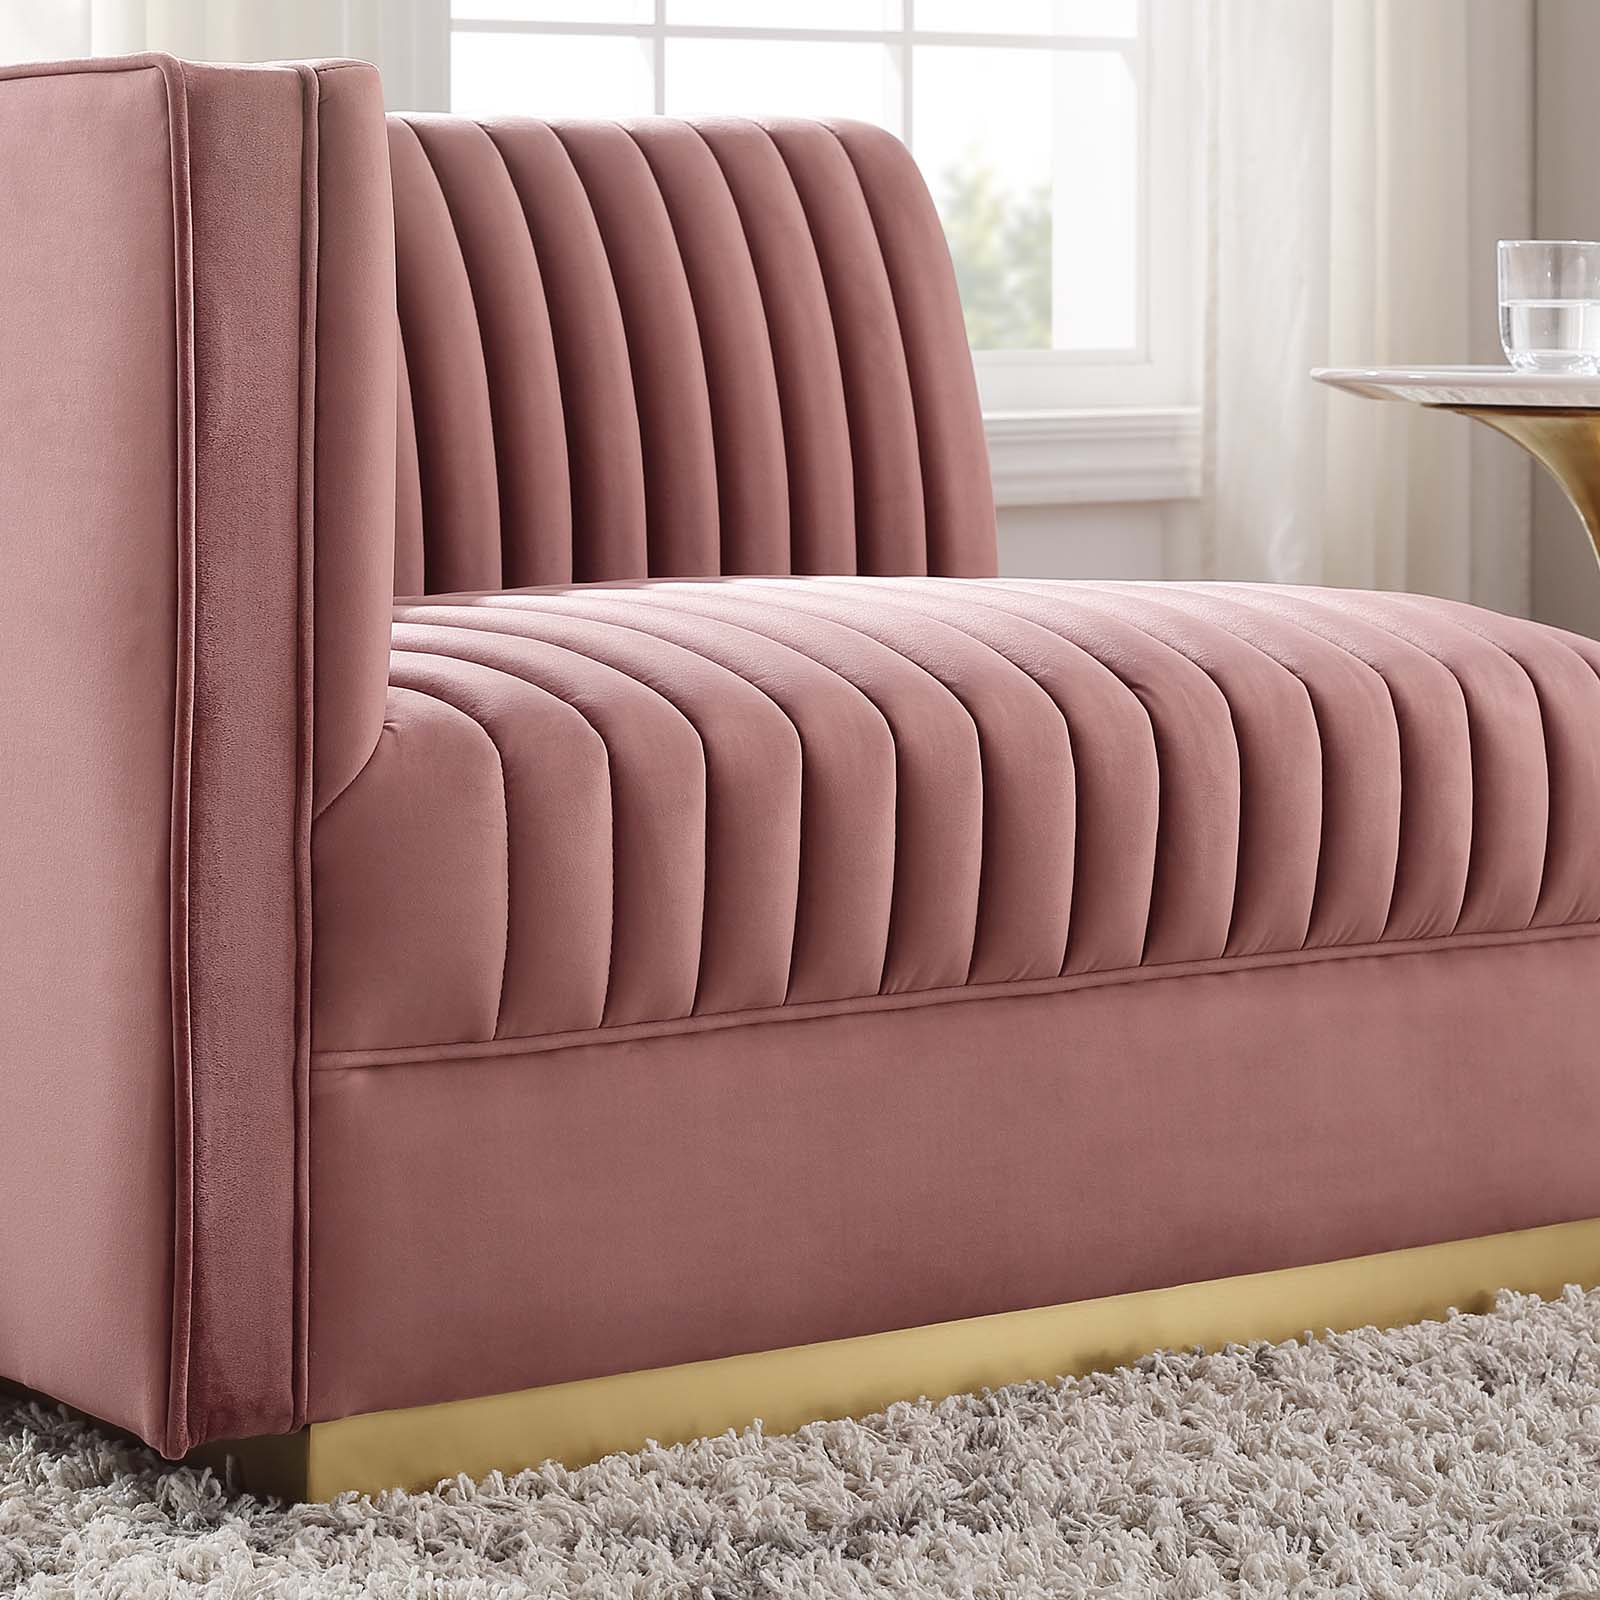 Sanguine Channel Tufted Performance Velvet Modular Sectional Sofa Left-Arm Chair-Corner Chair-Modway-Wall2Wall Furnishings